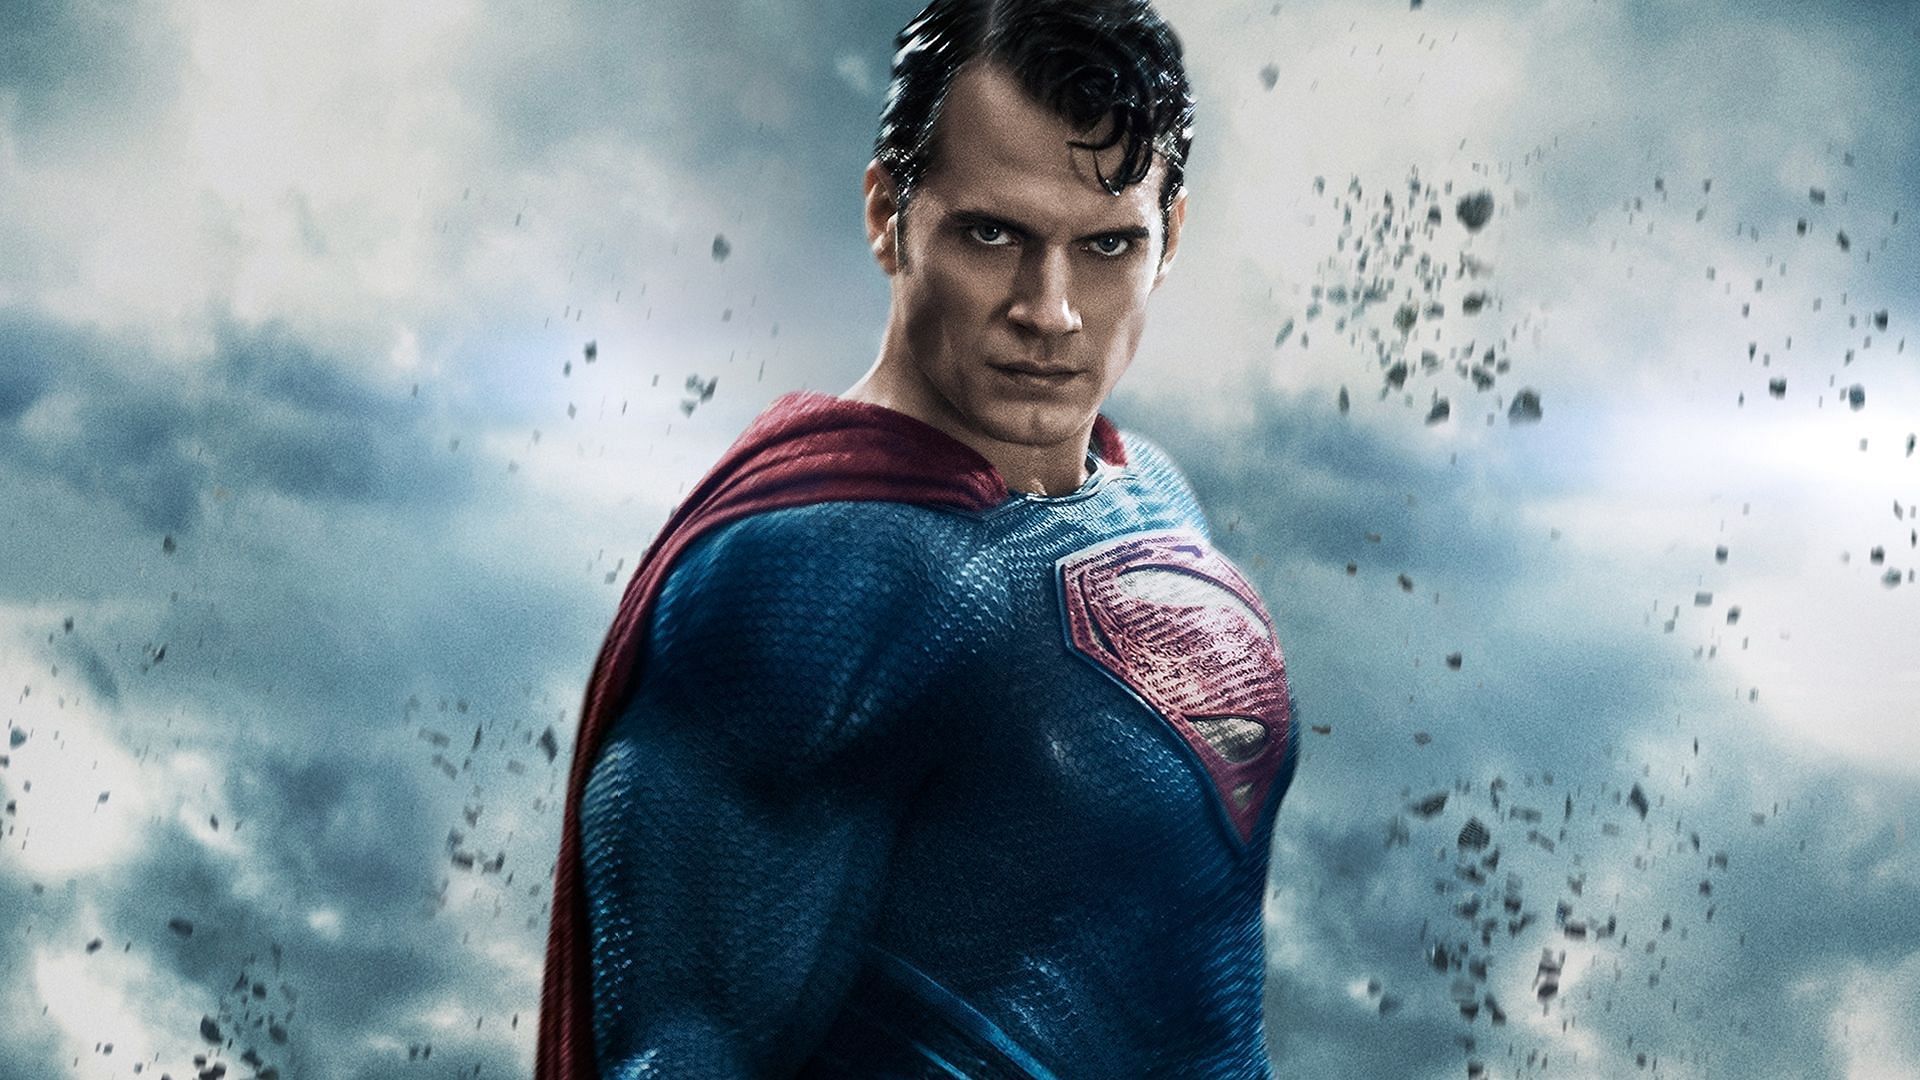 Henry Cavill exits the role of Superman, leaving fans wondering who will take on the mantle of the Man of Steel in the future (Image via Warner Bros)